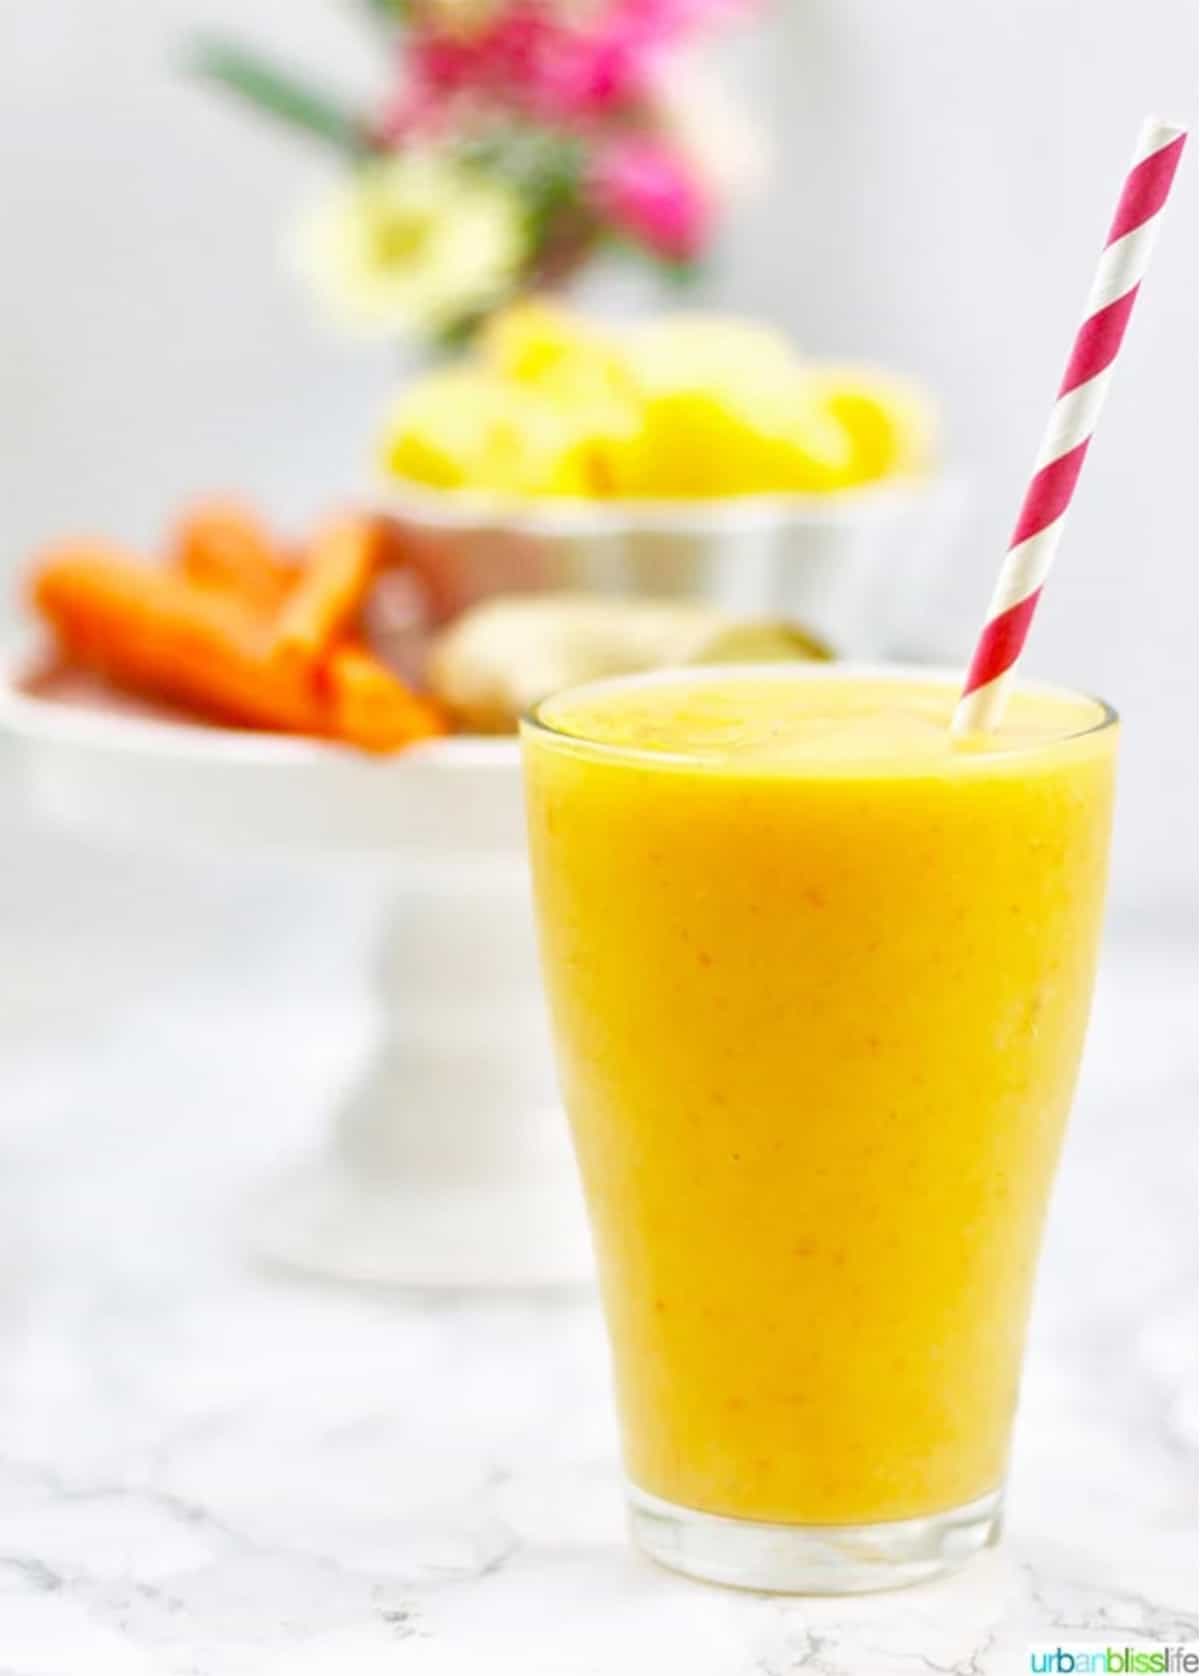 mango carrot smoothie in glass with red and white straw